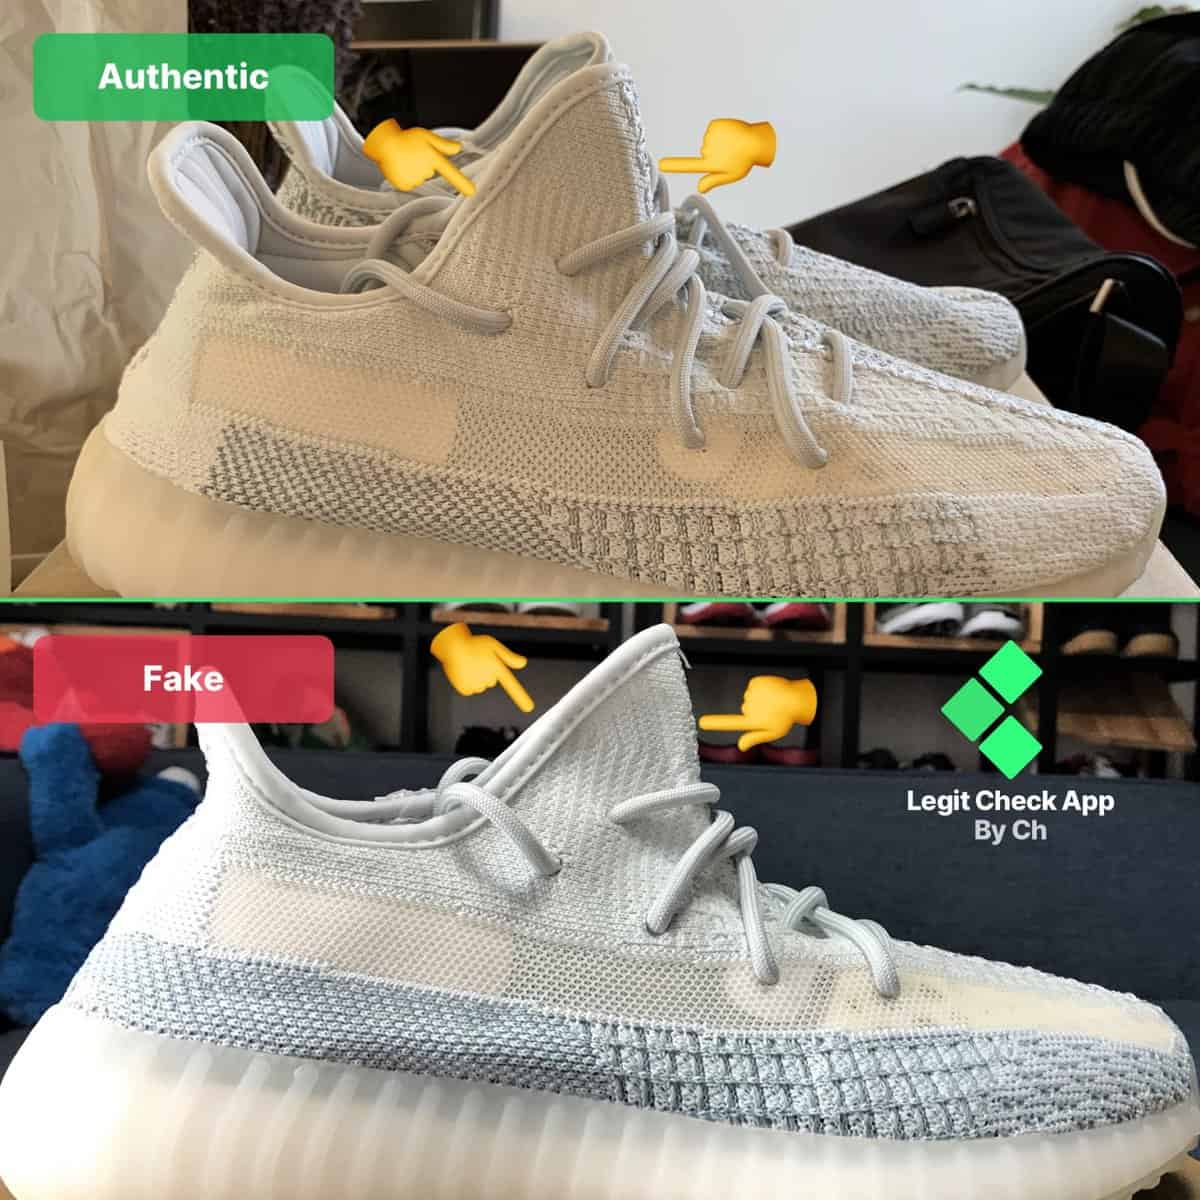 Fake Vs Real Yeezy Boost 350 V2 Cloud White Reflective And